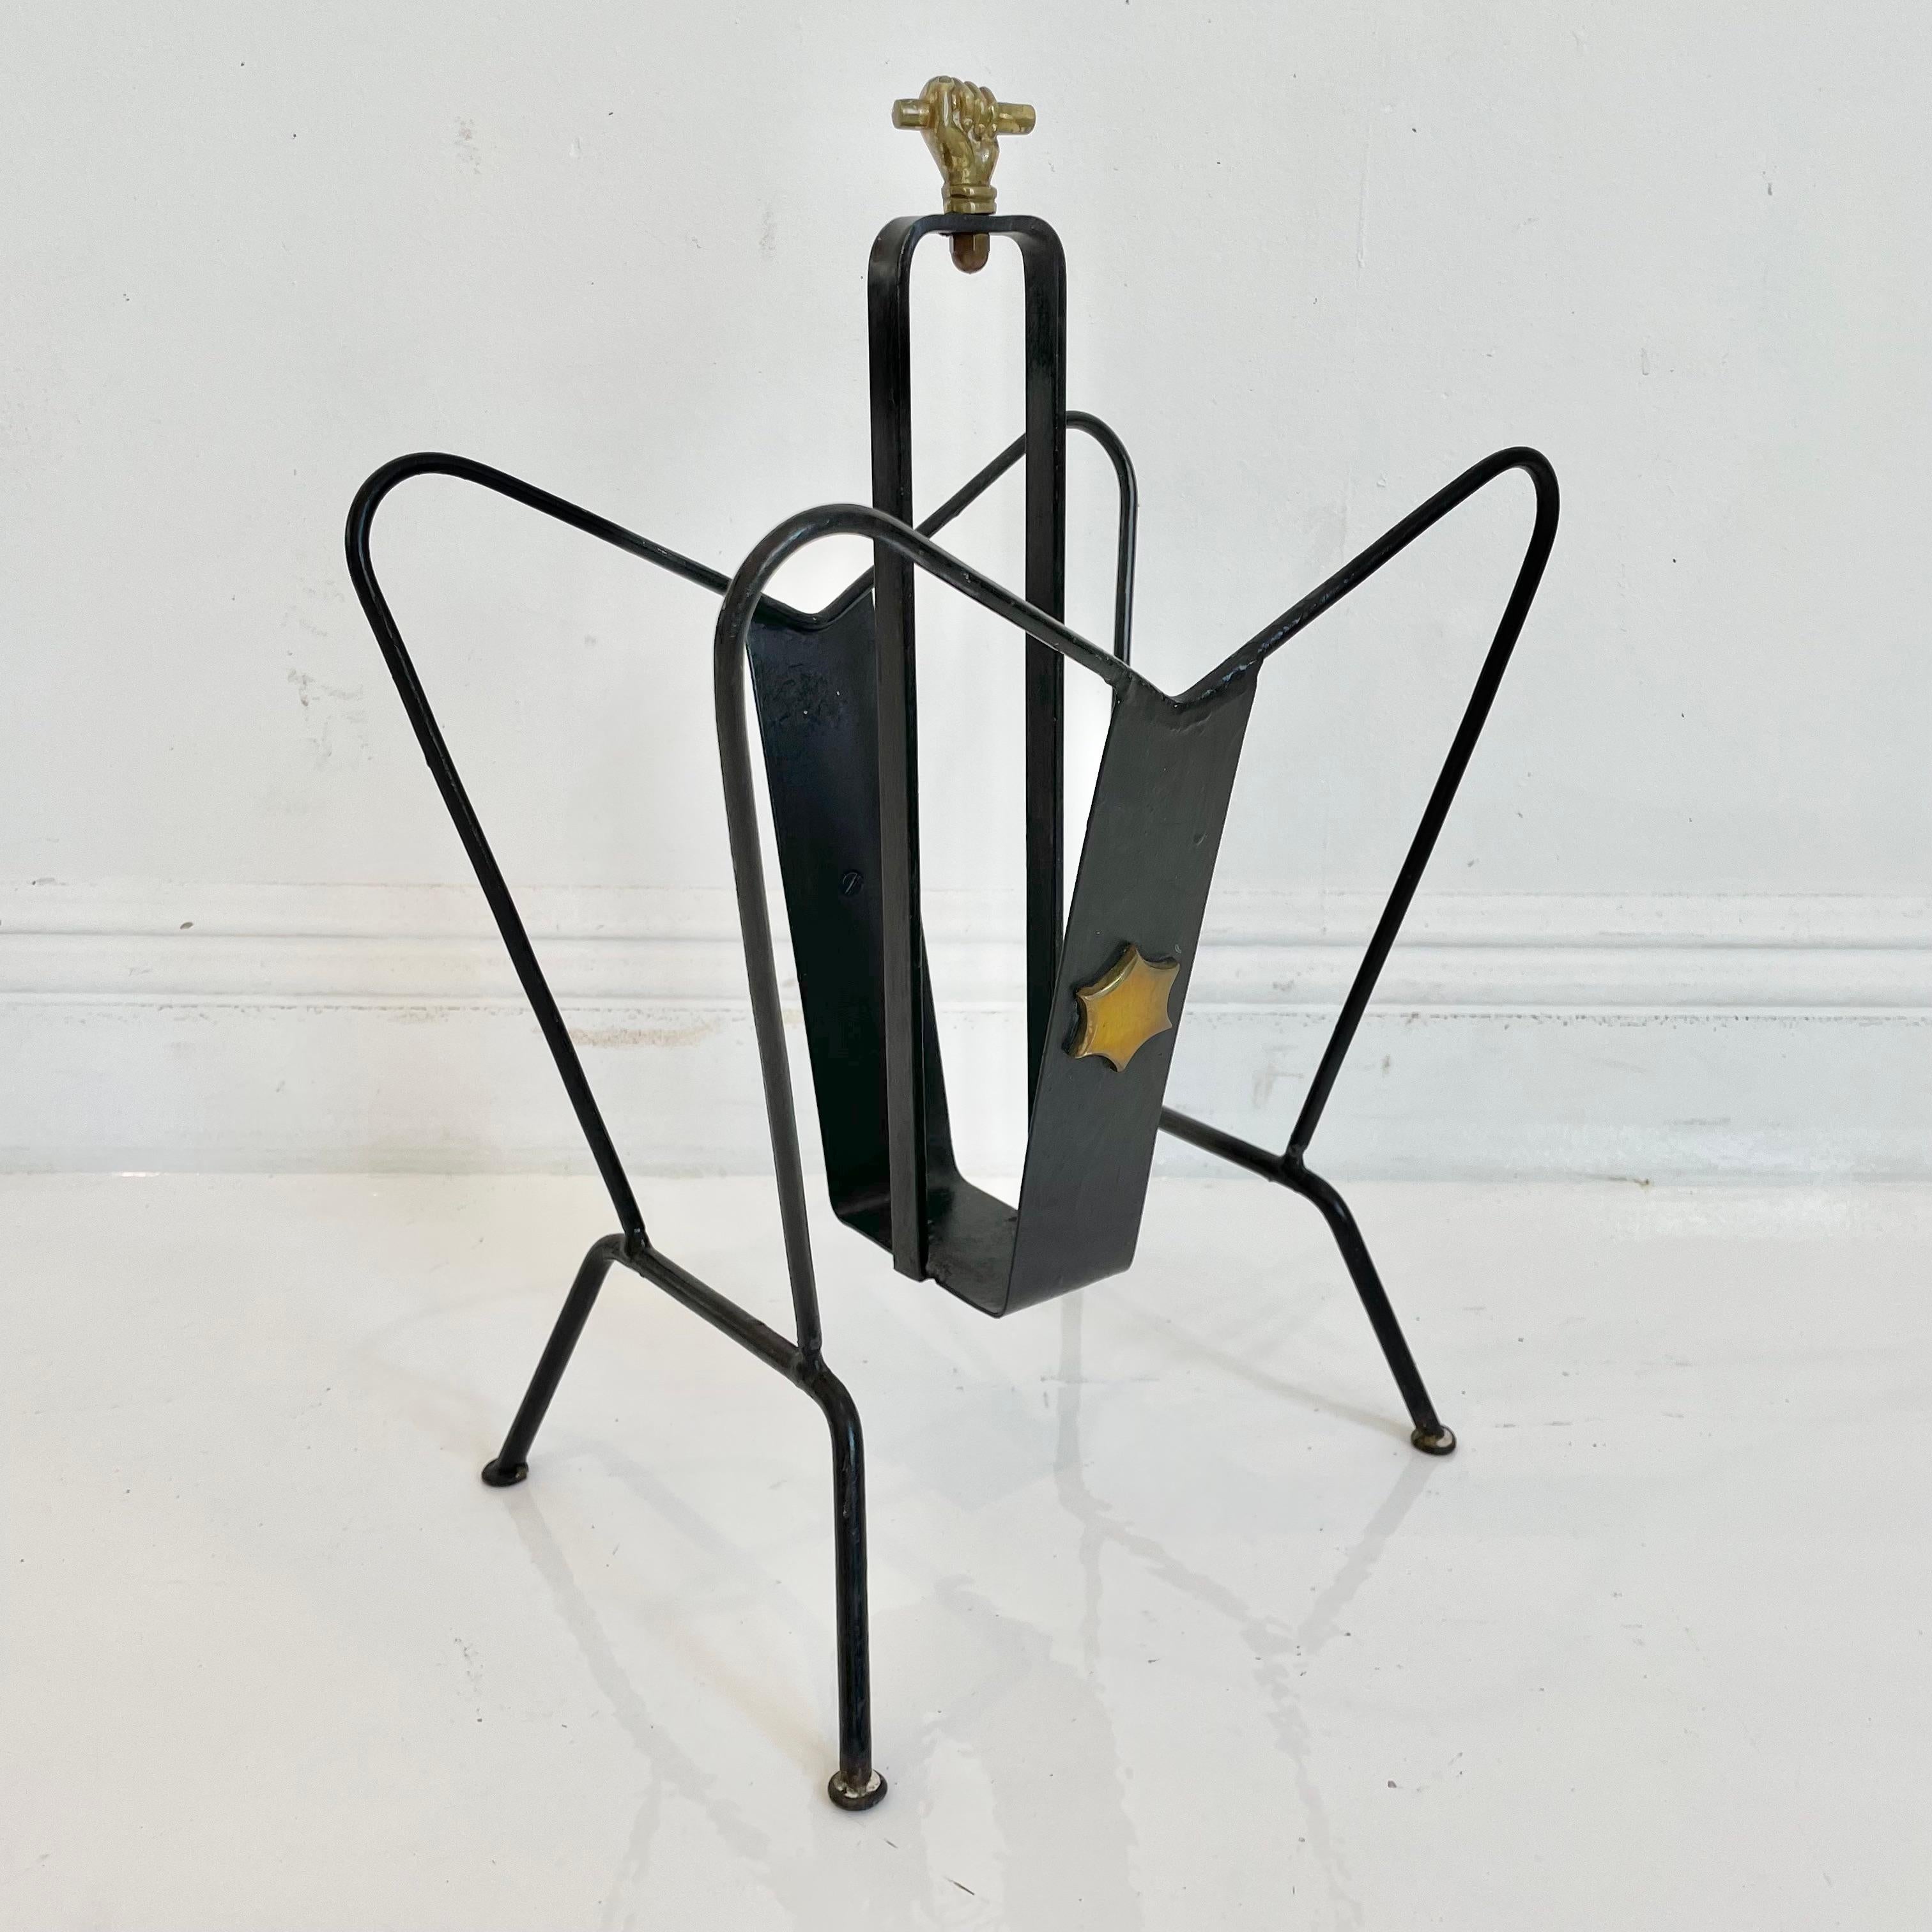 Handsome magazine rack by Jacques Adnet. Made of iron and brass. Excellent vintage condition. Star detail on both sides and closed fist on top. Great piece!